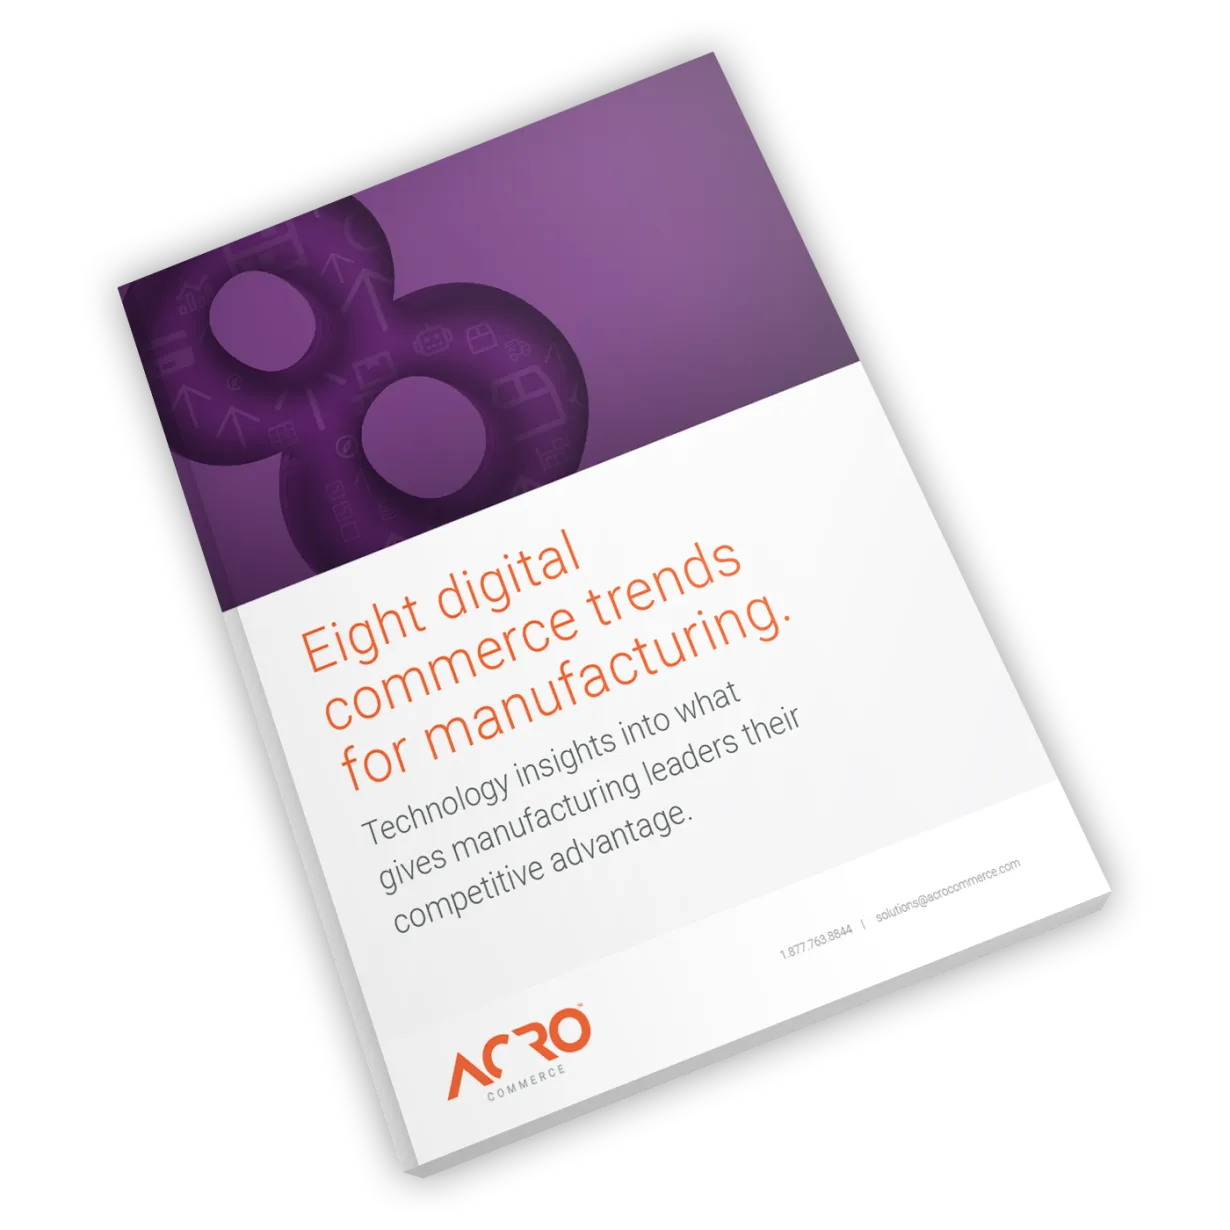 Eight digital commerce trends for manufacturing - Booklet